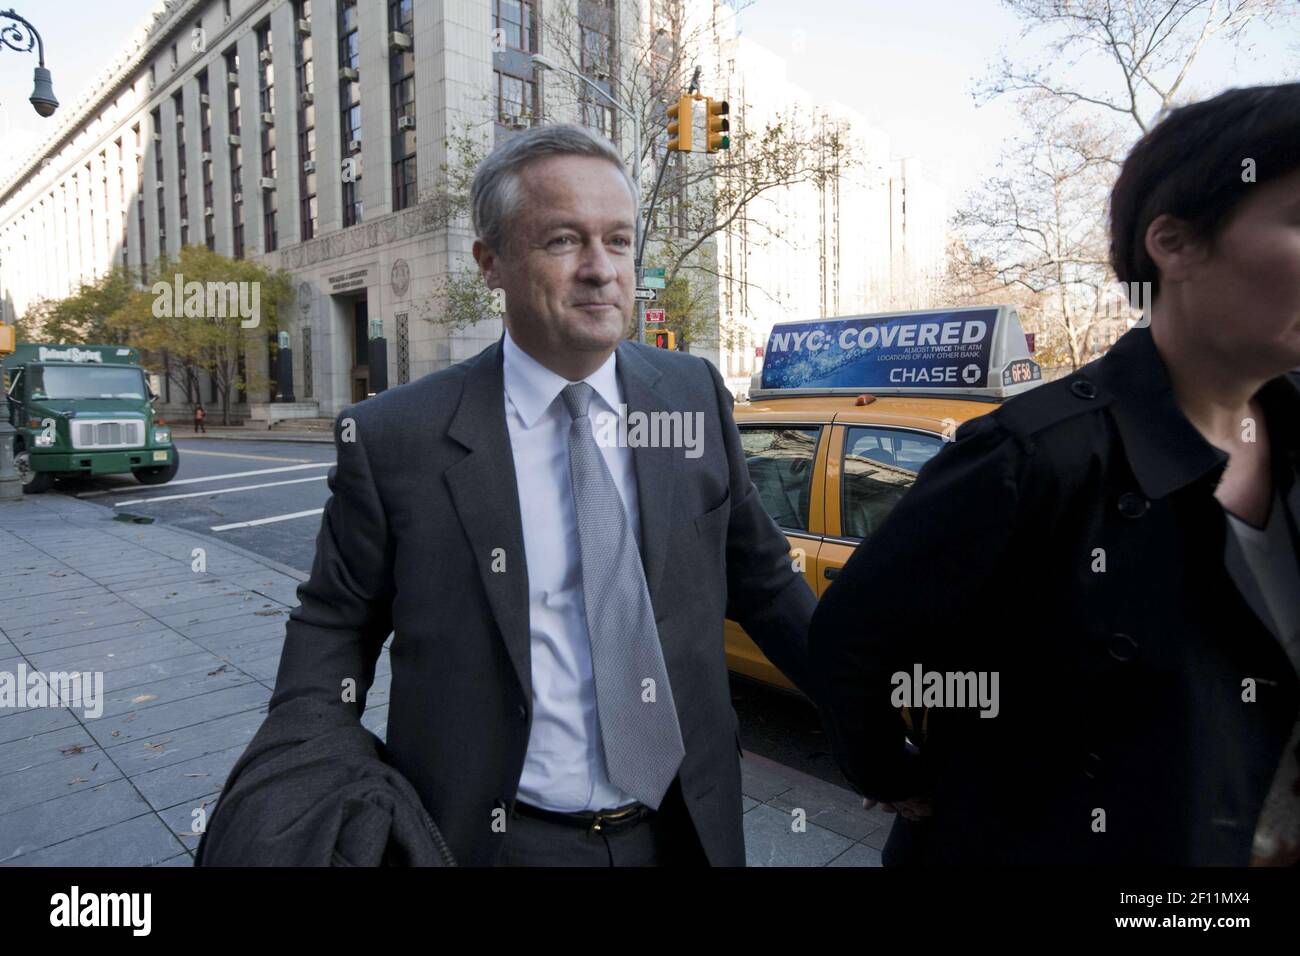 20 November 2009- New York, NY- Former Vivendi CEO Jean-Marie Messier arrives at the United States Courthouse in lower Manhattan to testify in a civil trial regarding the defrauding of shareholders by the French conglomerate. Photo Credit: Erik Sumption/Sipa Press/Messier.009/0911210453 Stock Photo